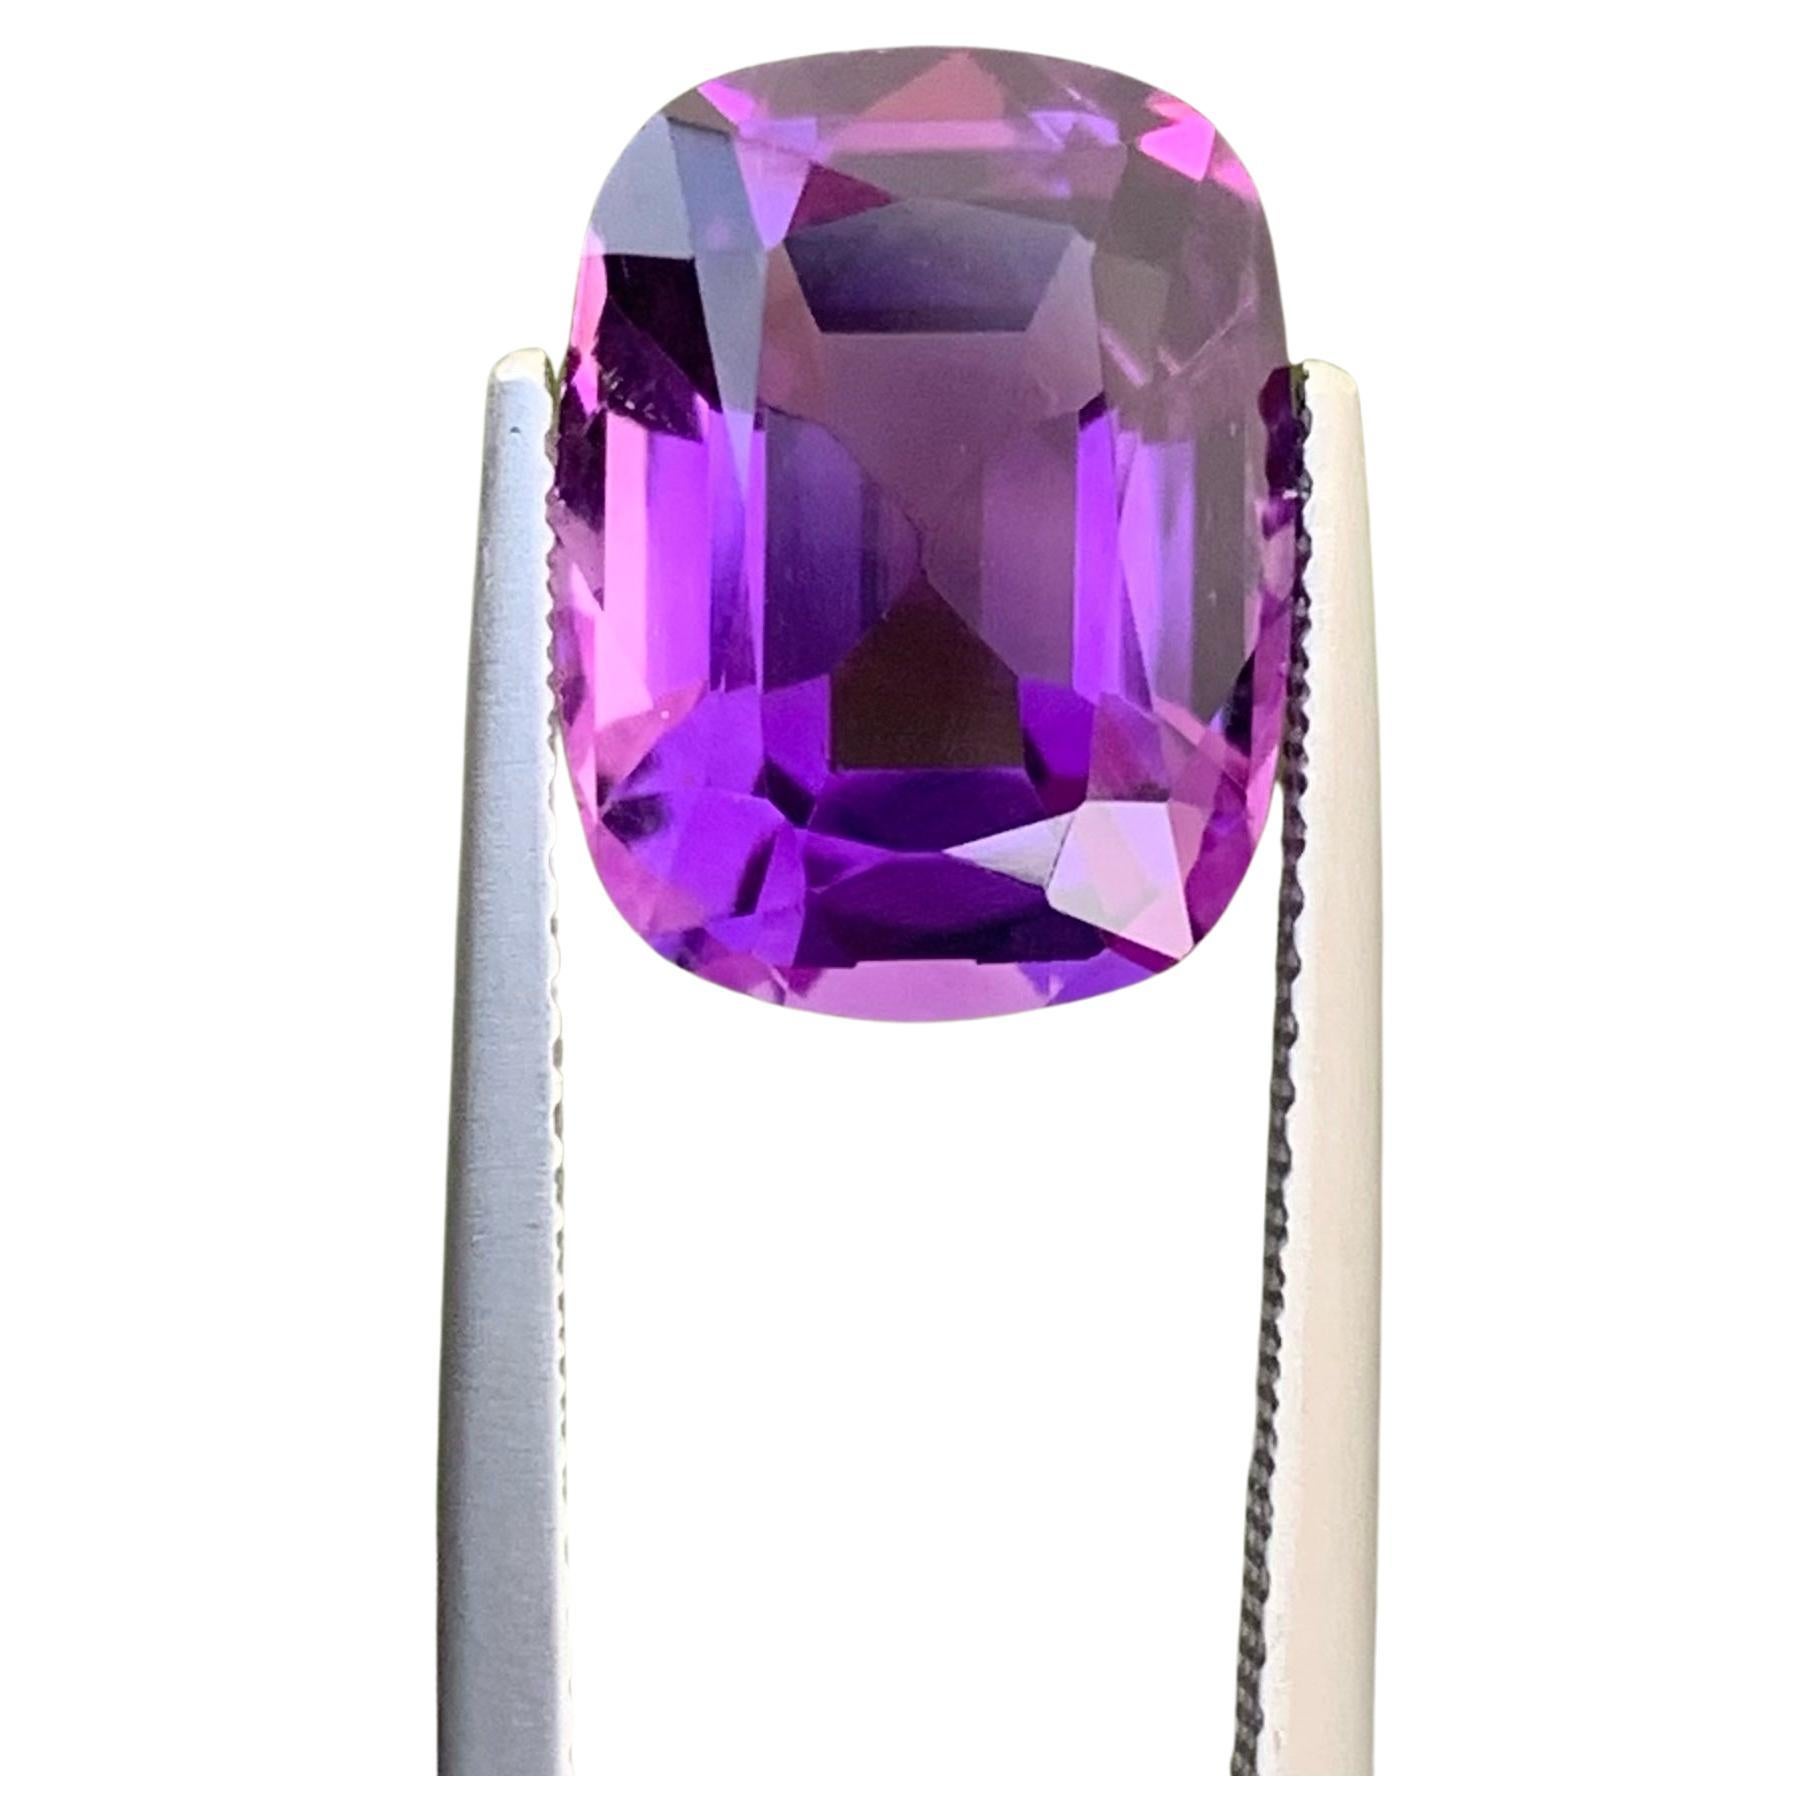 Stunning Natural Purple Amethyst Gemstone 5.35 Carats Loupe Clean Clarity For Sale